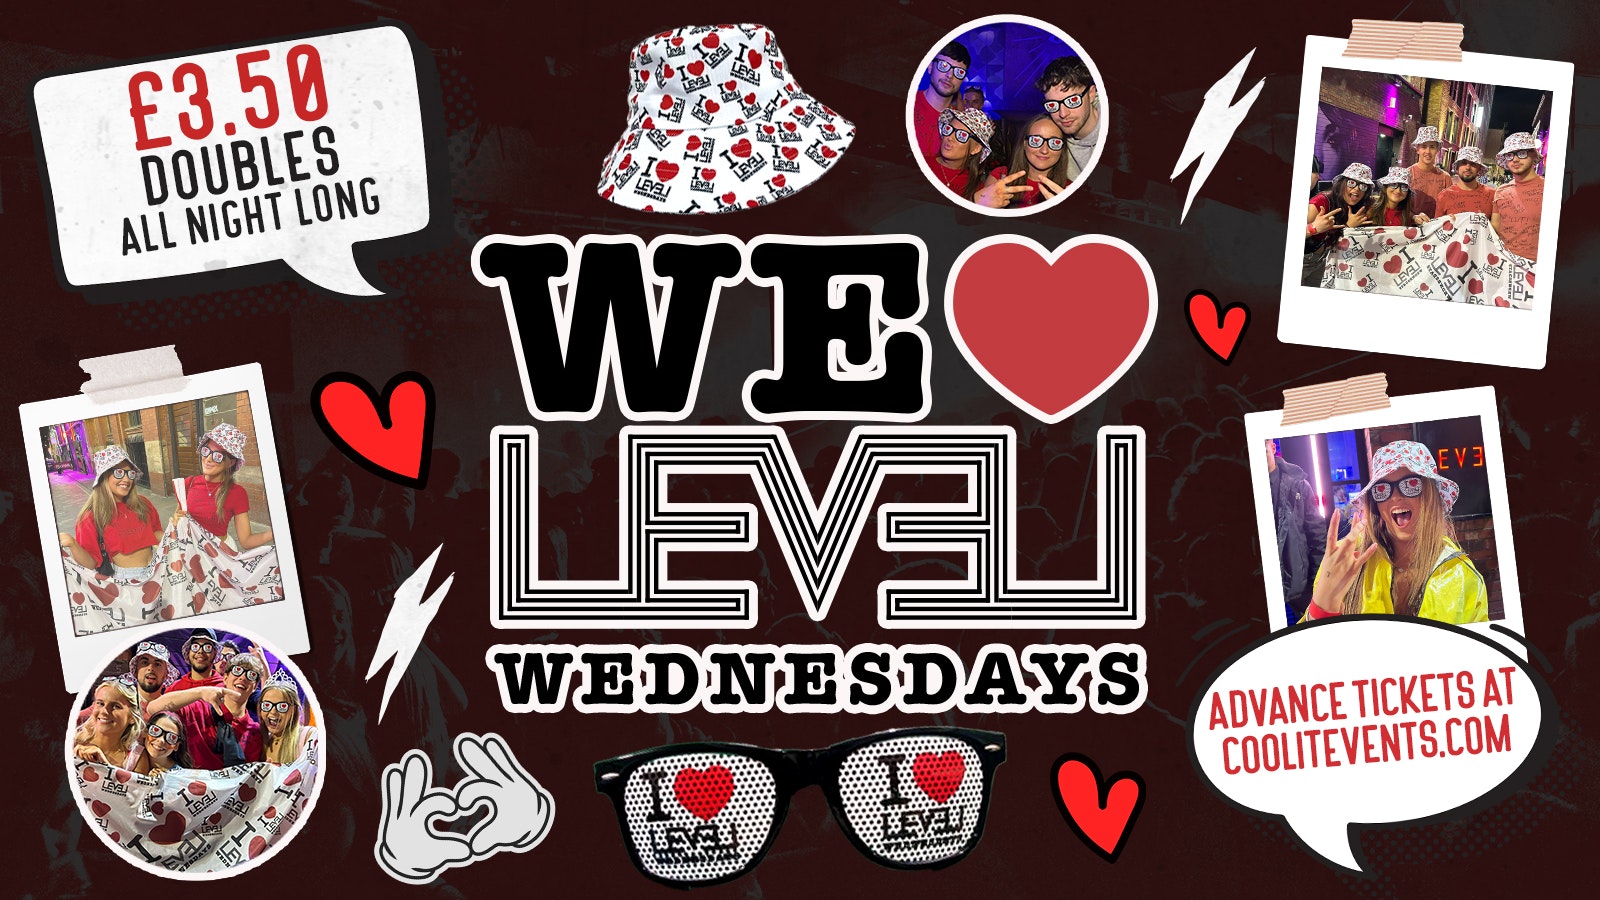 DAY 4 – OFFICIAL EVENT 1 – We LOVE Level Wednesdays : Freshers Opening Party